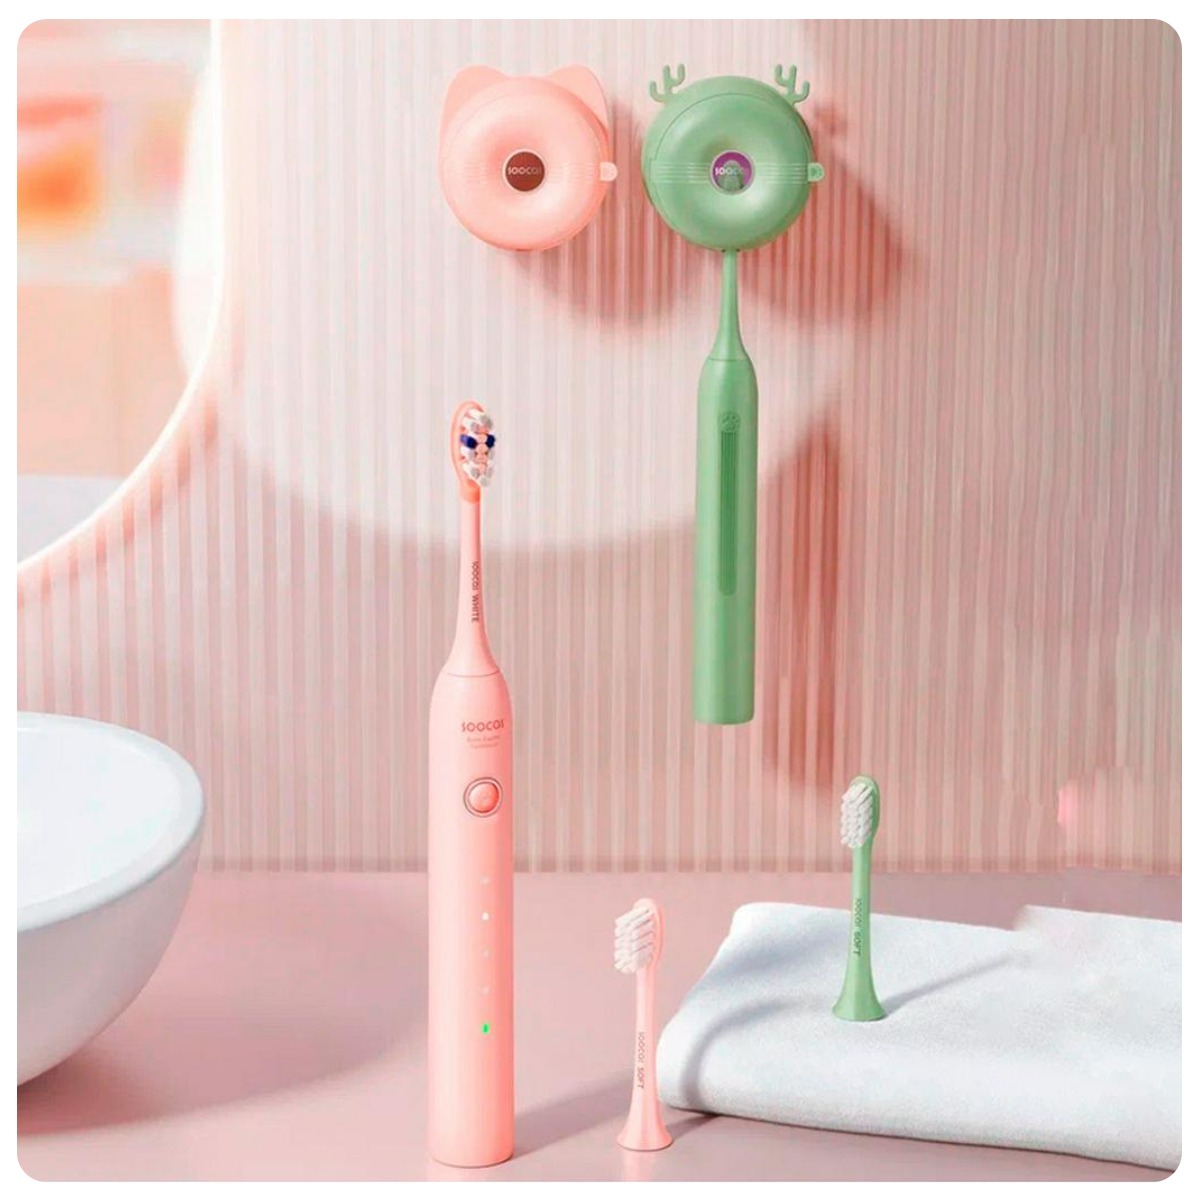 XiaoMi-Soocas-All-Care-Sonic-Electric-Toothbrush-D3-07